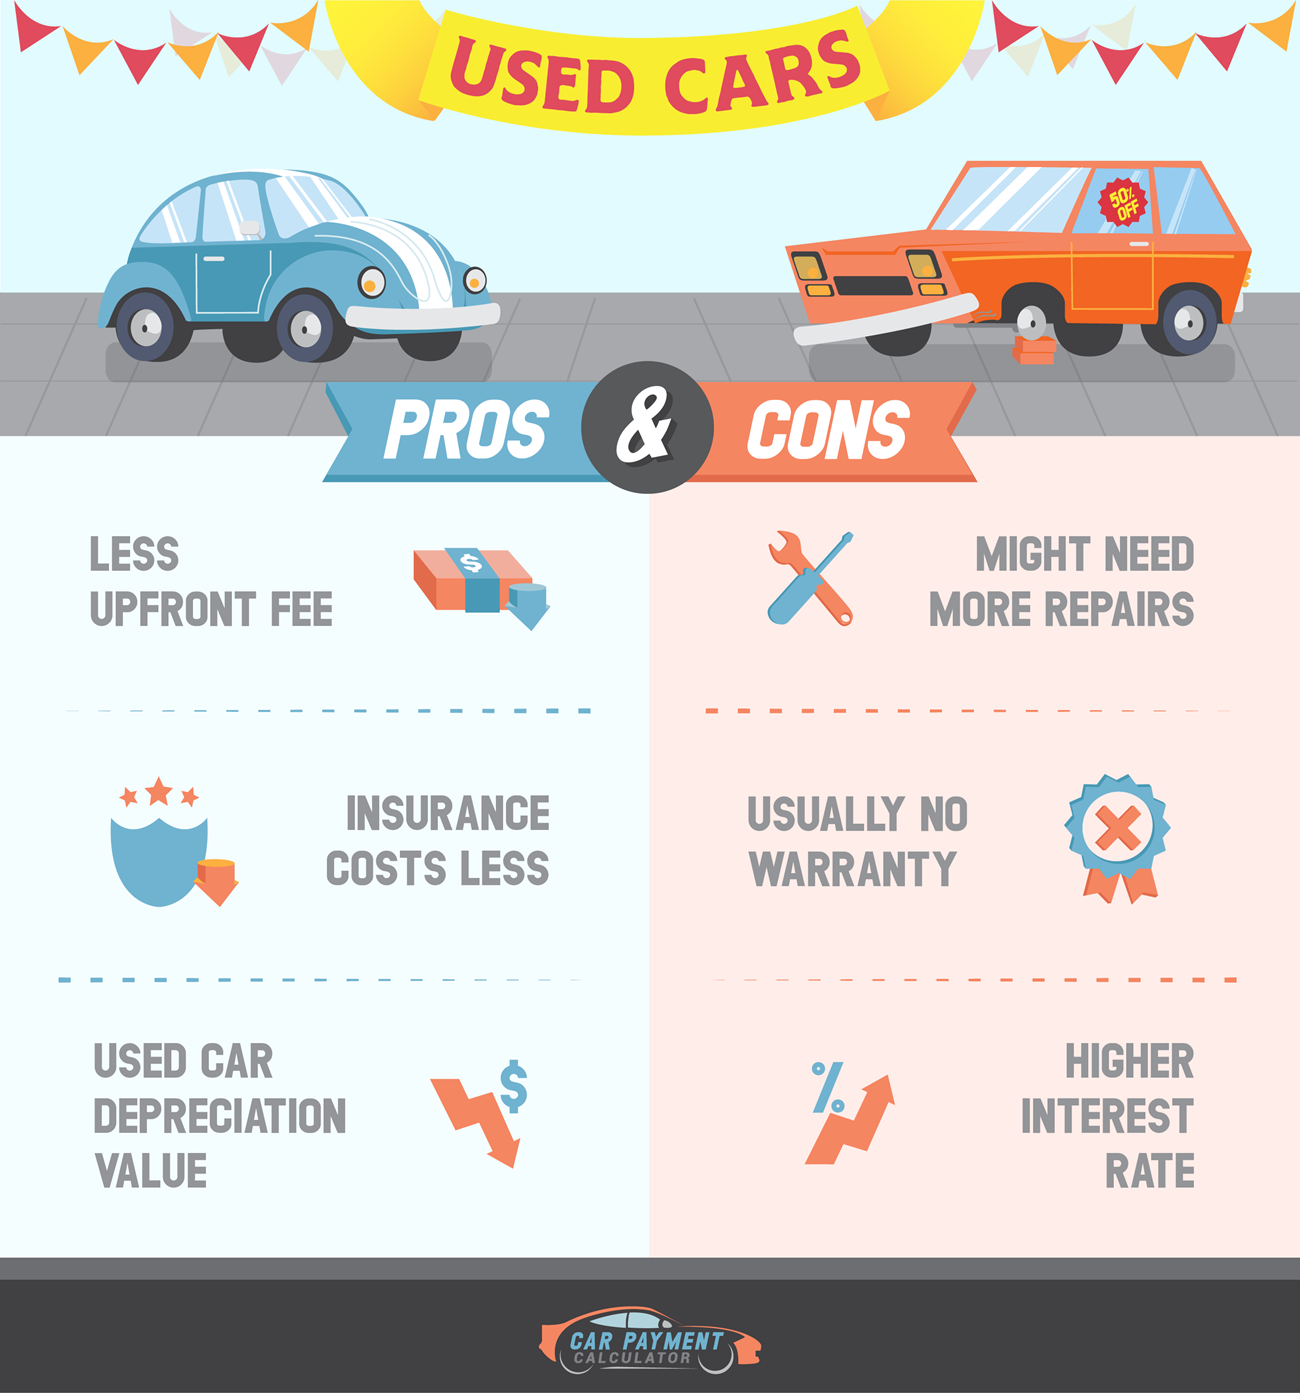 Pros and Cons for Buying Used Cars.